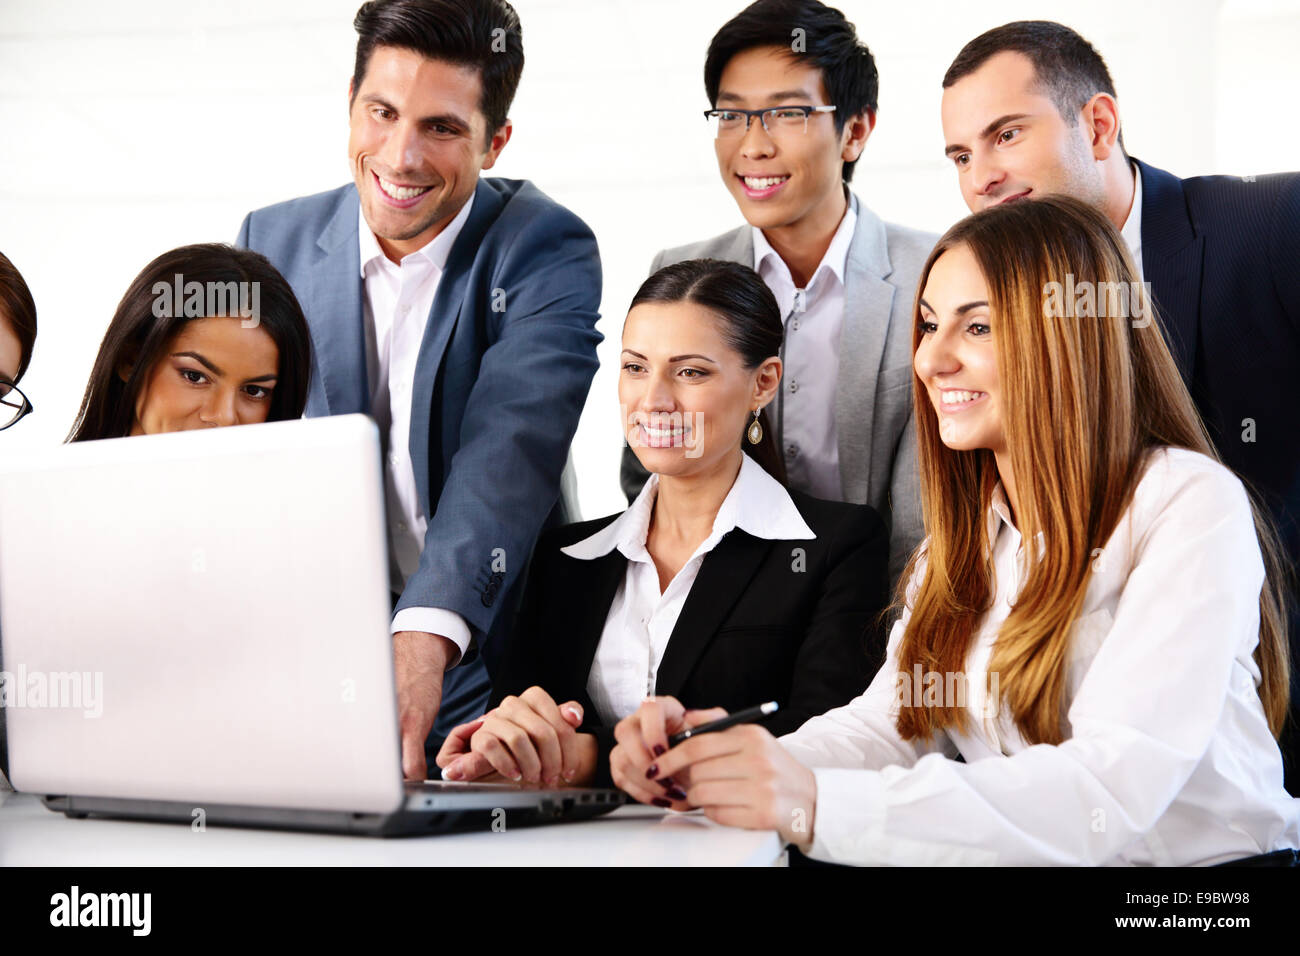 Smiling businesspeople working on the laptop together Stock Photo